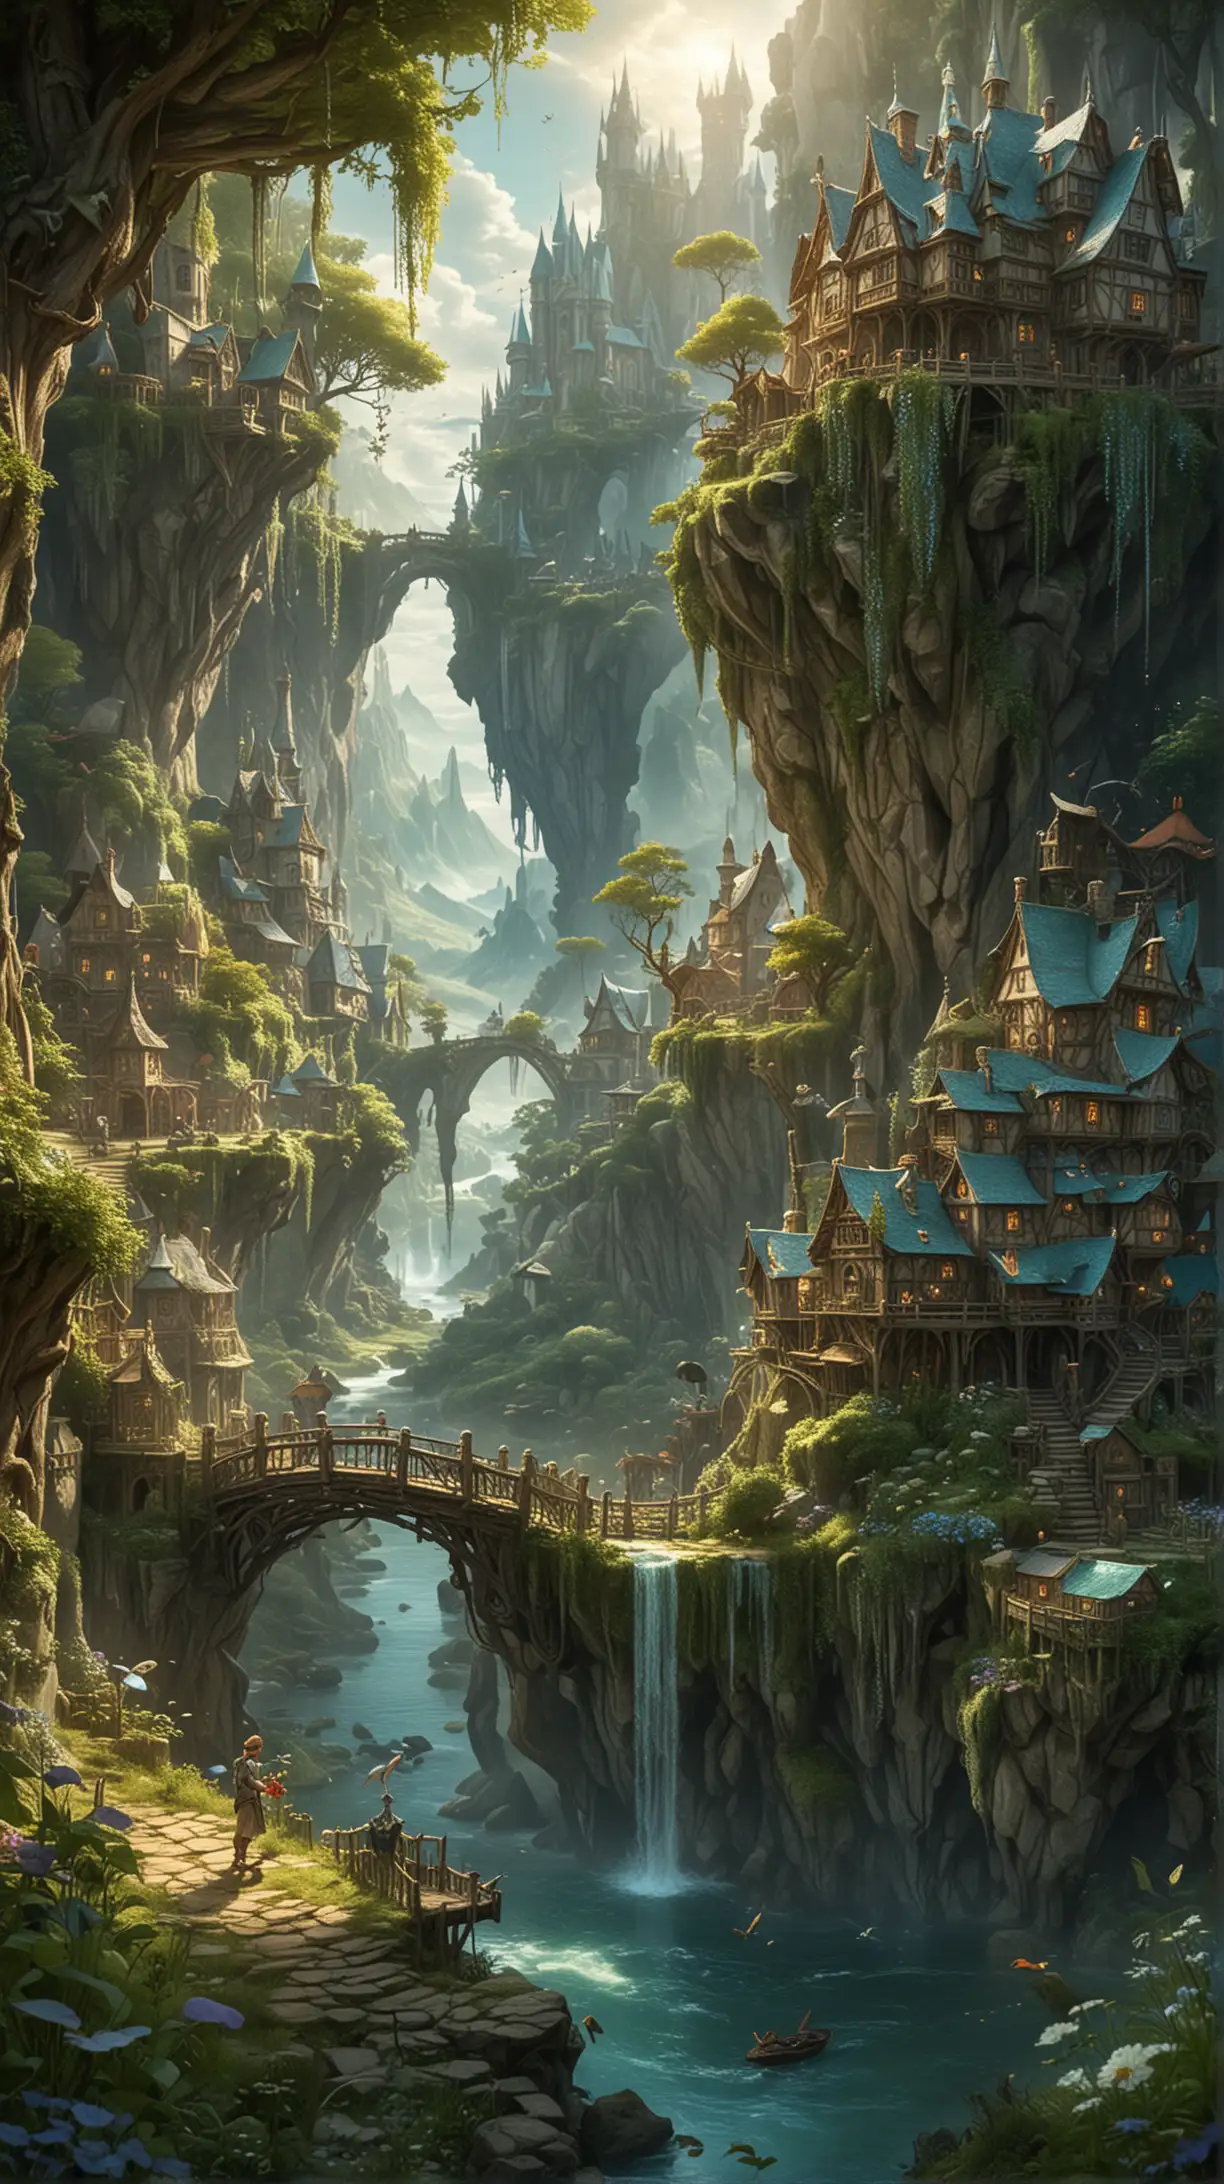 Enchanting Realm of Elysia Magical World with Fantastical Creatures